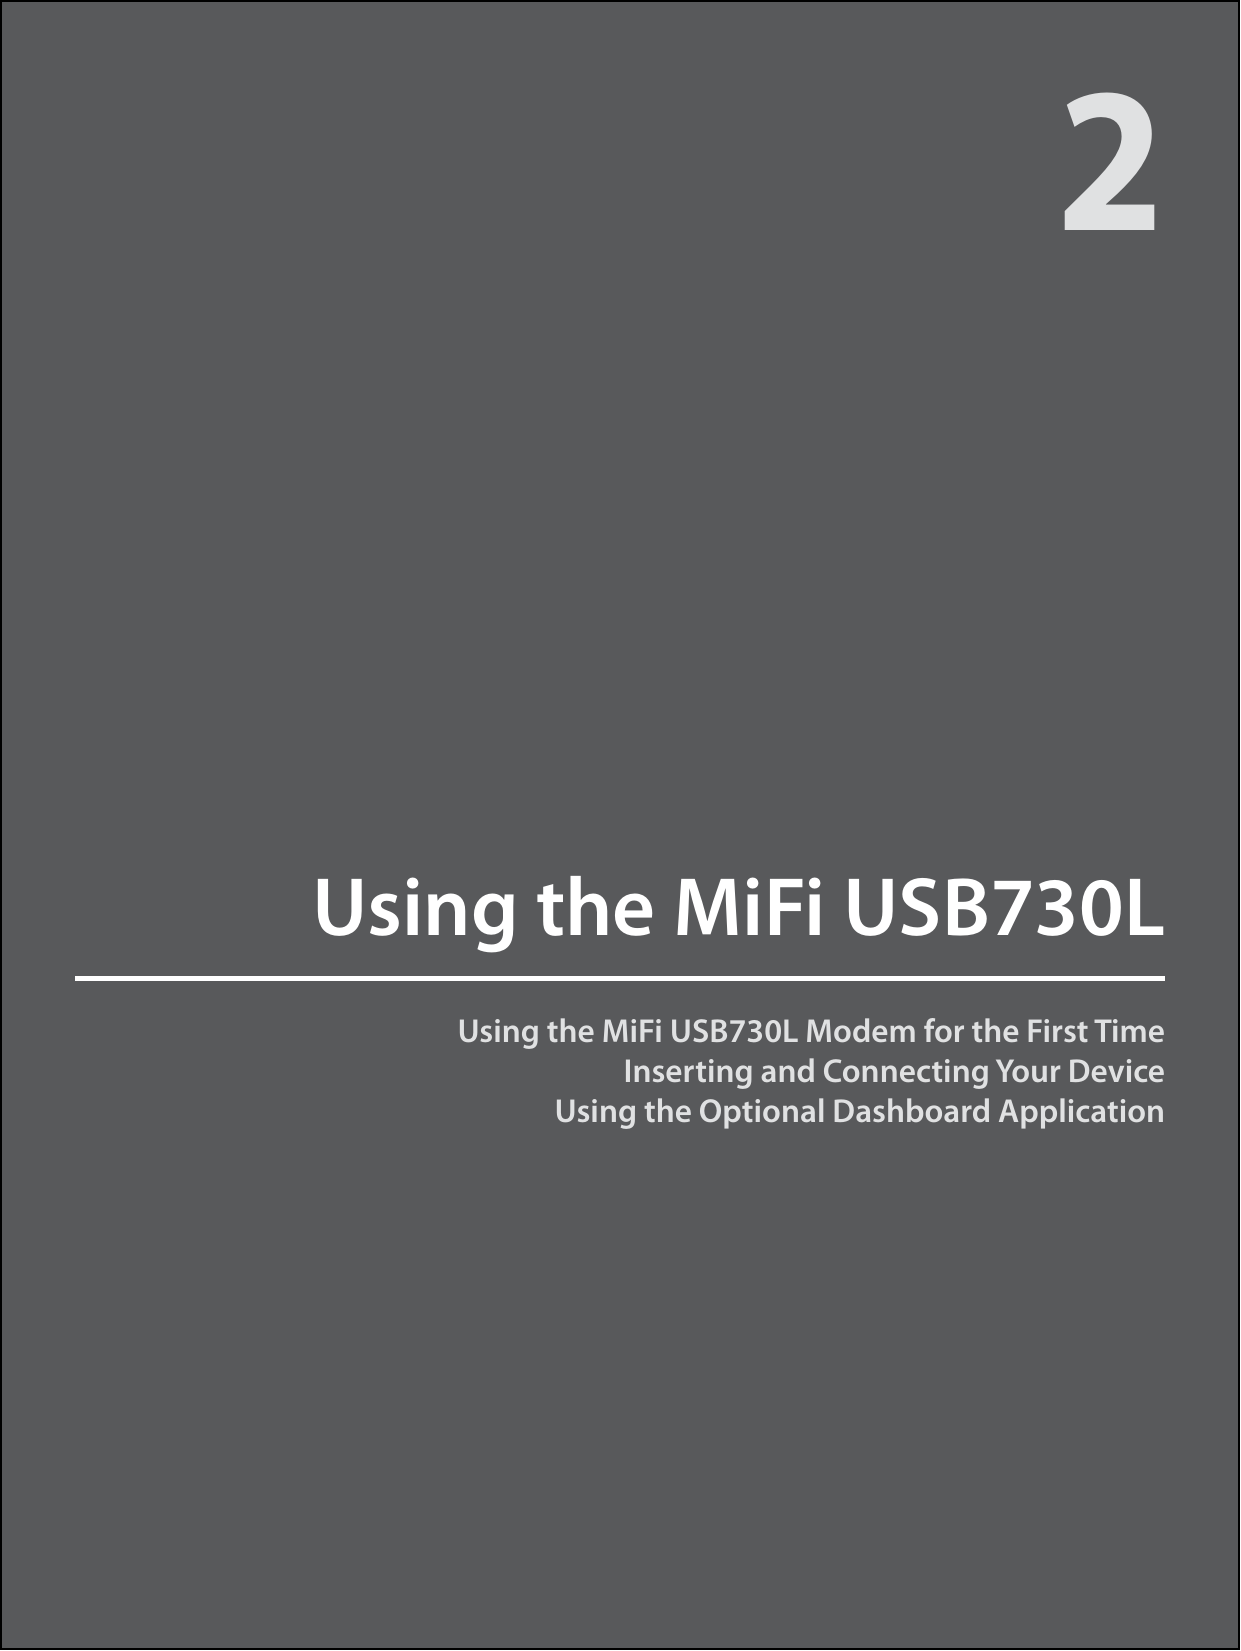 Using the MiFi USB730L Modem for the First TimeInserting and Connecting Your DeviceUsing the Optional Dashboard ApplicationUsing the MiFi USB730L2